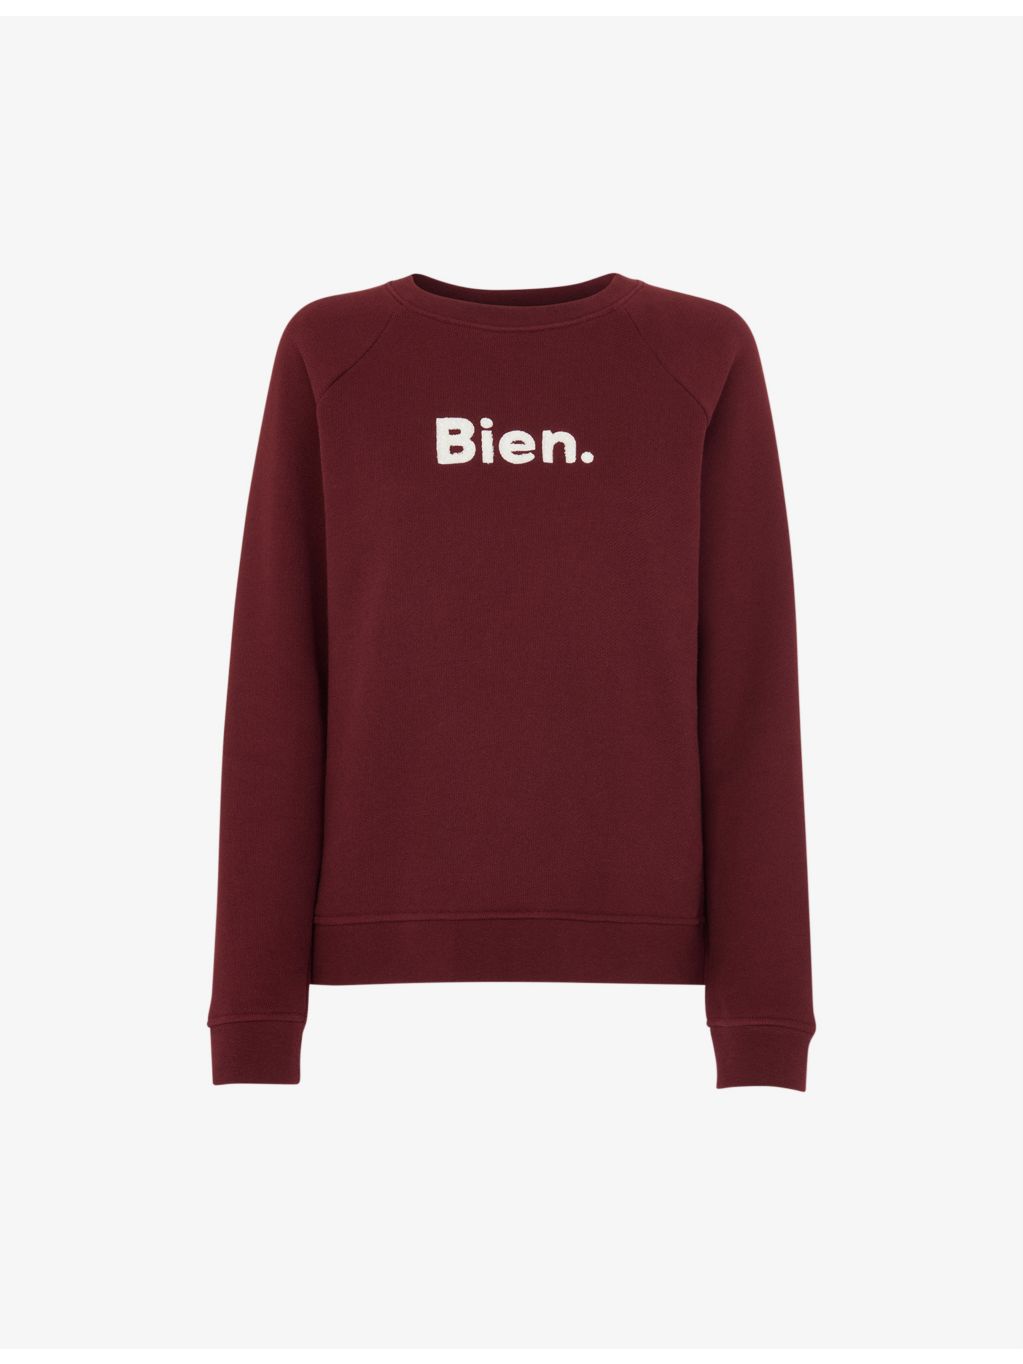 WHISTLES - Bien relaxed-fit cotton sweatshirt